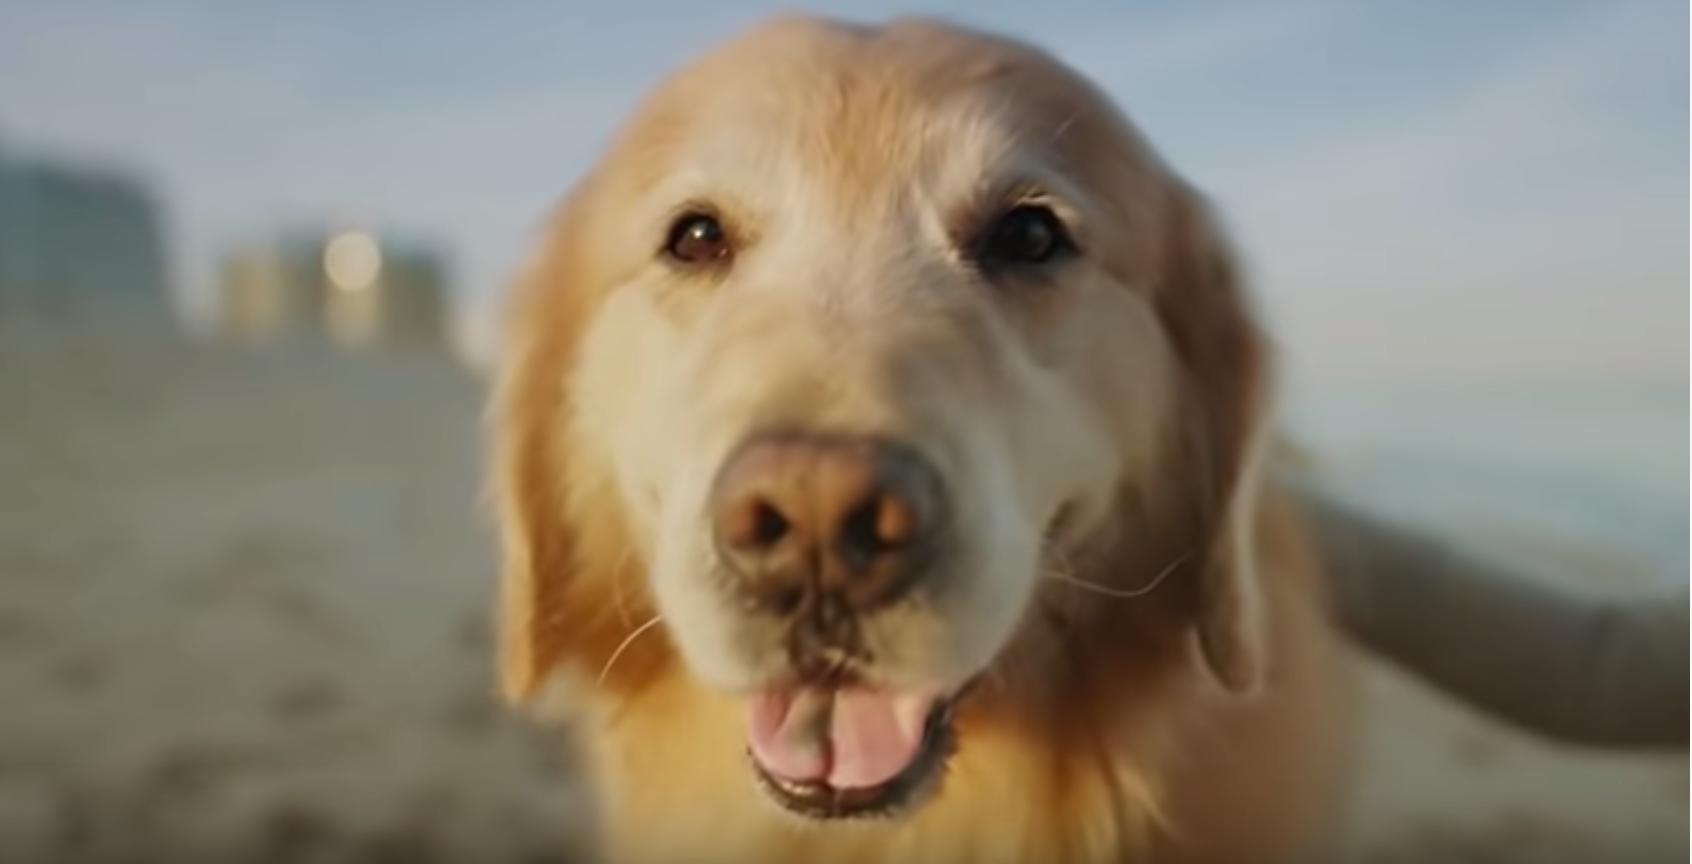 One ‘lucky dog’ (and one lucky vet school) to be featured in the Super Bowl 